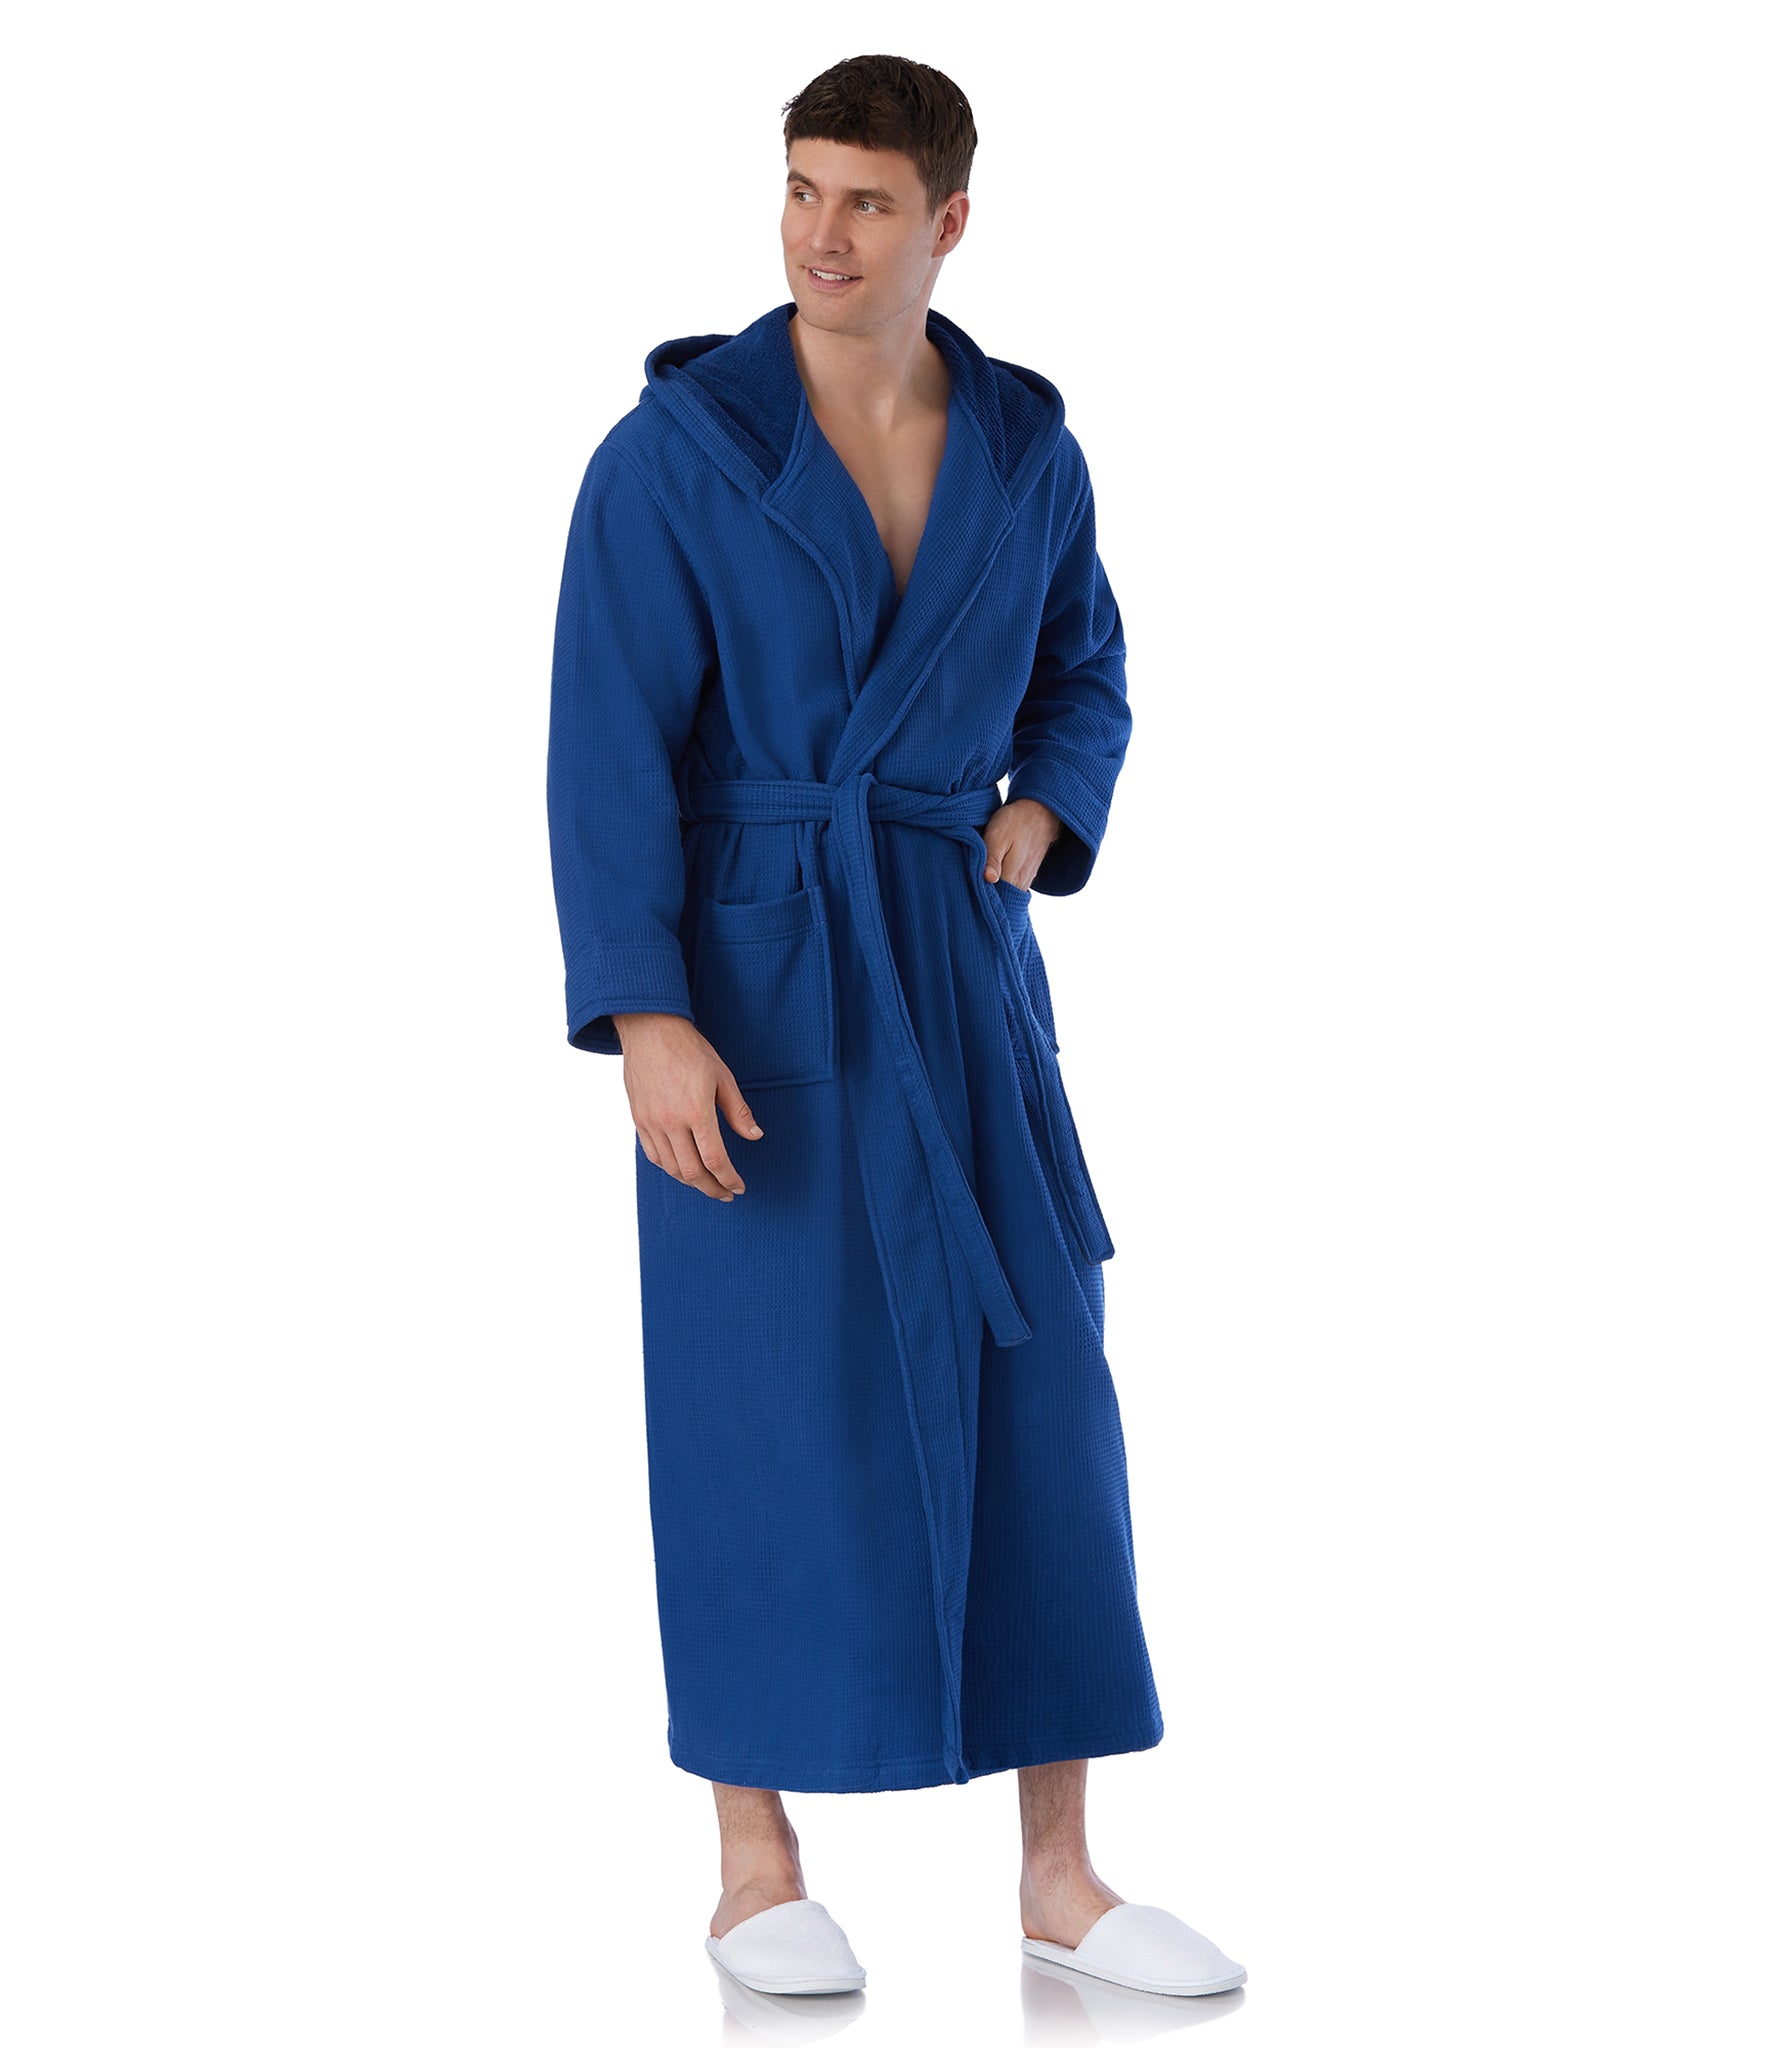 Couples Gifts for Weddings & Anniversaries │ Luxury Spa Robes | Luxury Spa  Robes